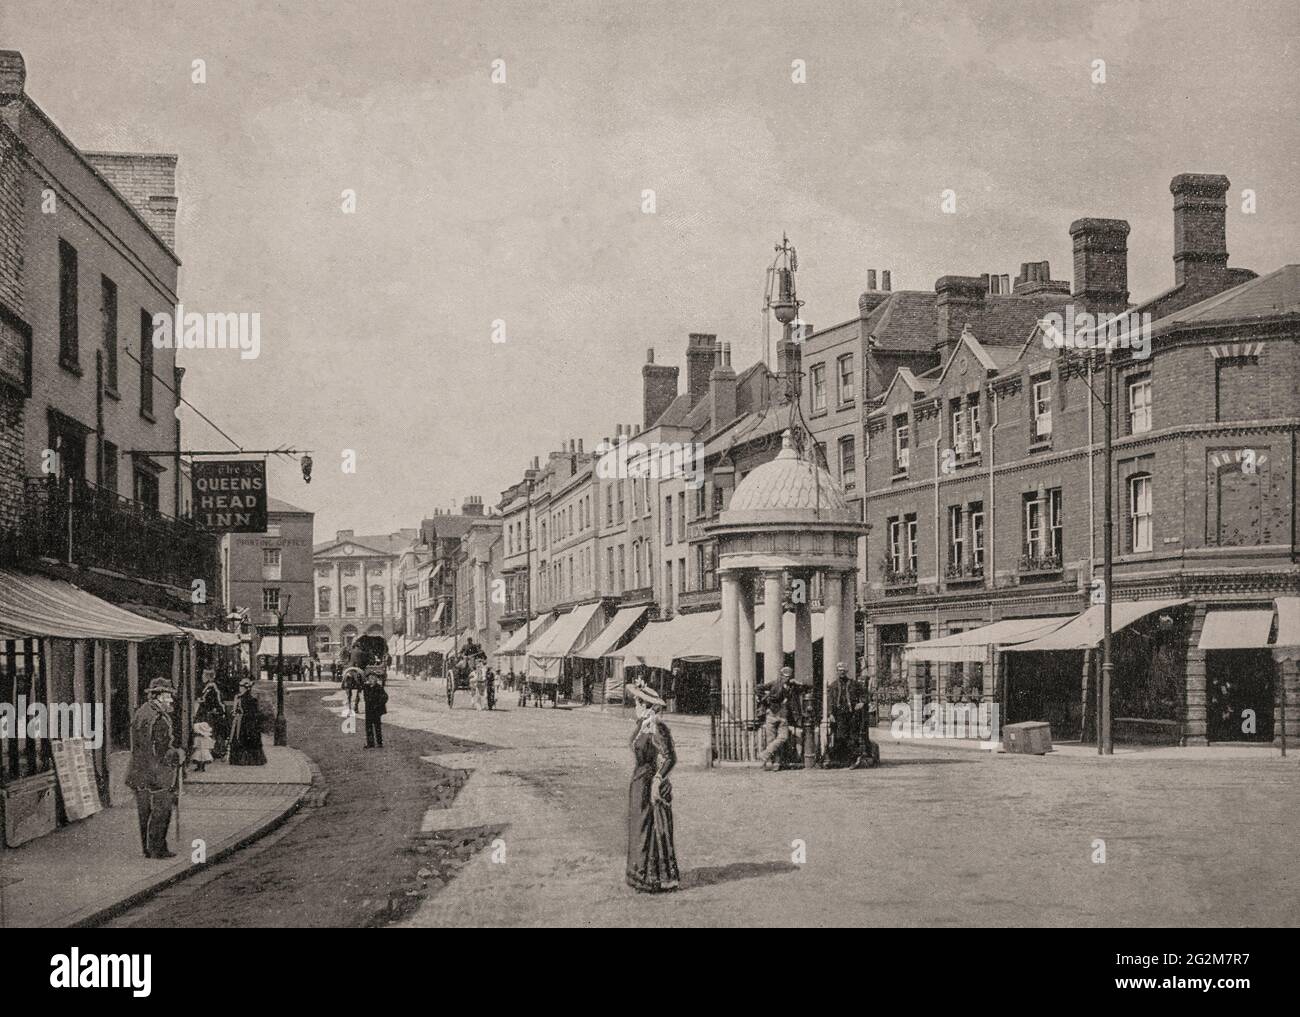 A late 19th century view of the Conduit in Chelmsford, city and the county town of Essex, England. At one time it housed the town's only fresh water supply, until relocated to the High Street where it stood from 1857 t0 1940. Stock Photo